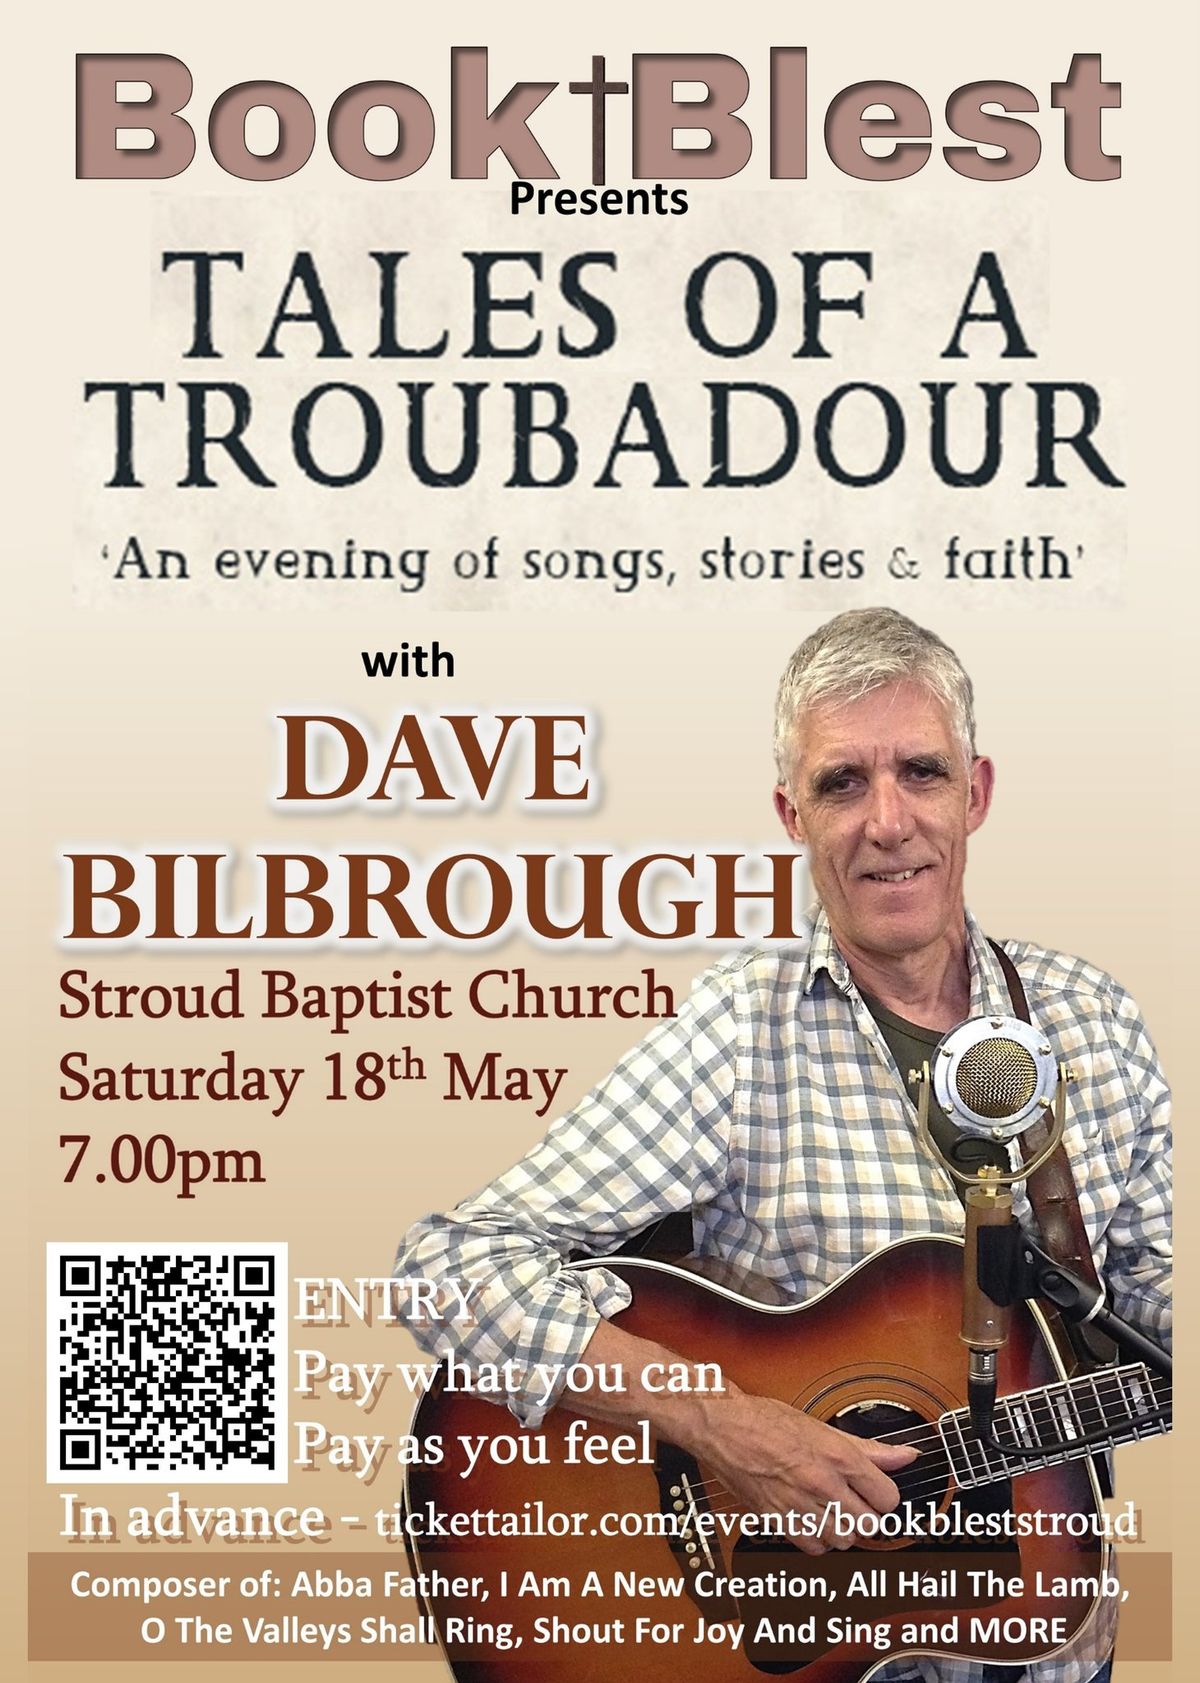 Book Blest presents TALES OF A TROUBADOUR with DAVE BILBROUGH